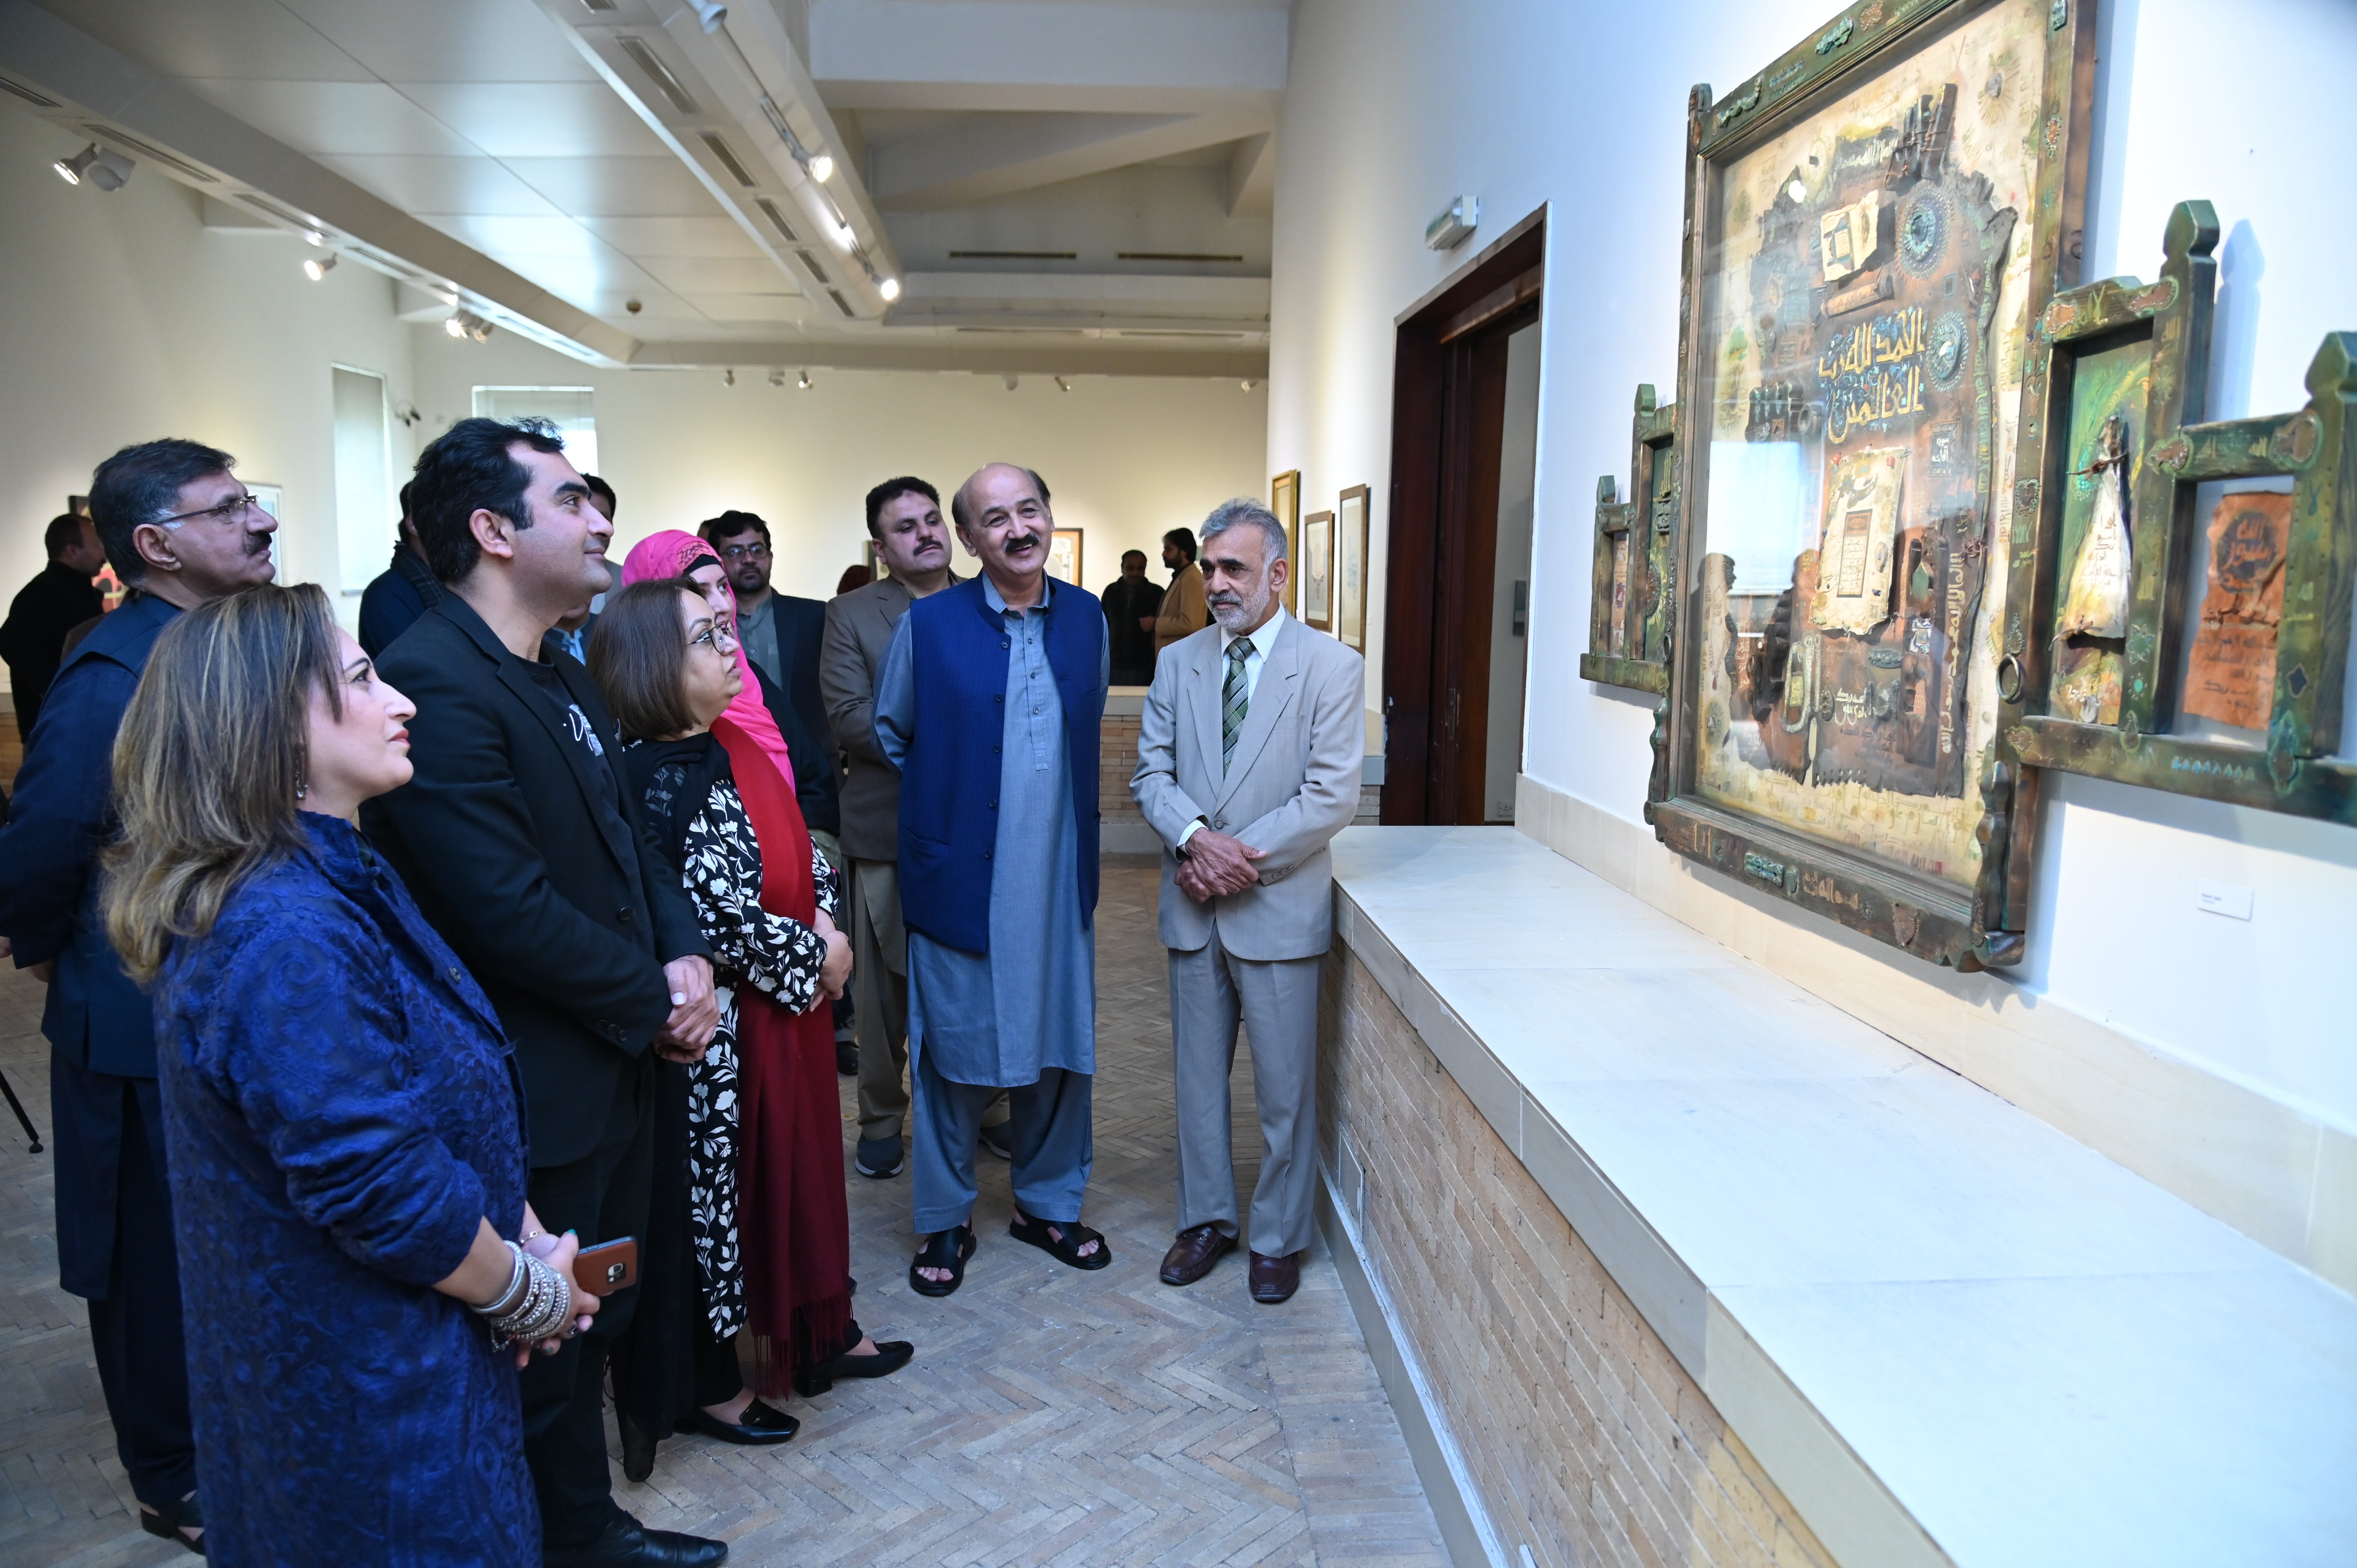 The visit of chief guests at the calligraphy exhibition